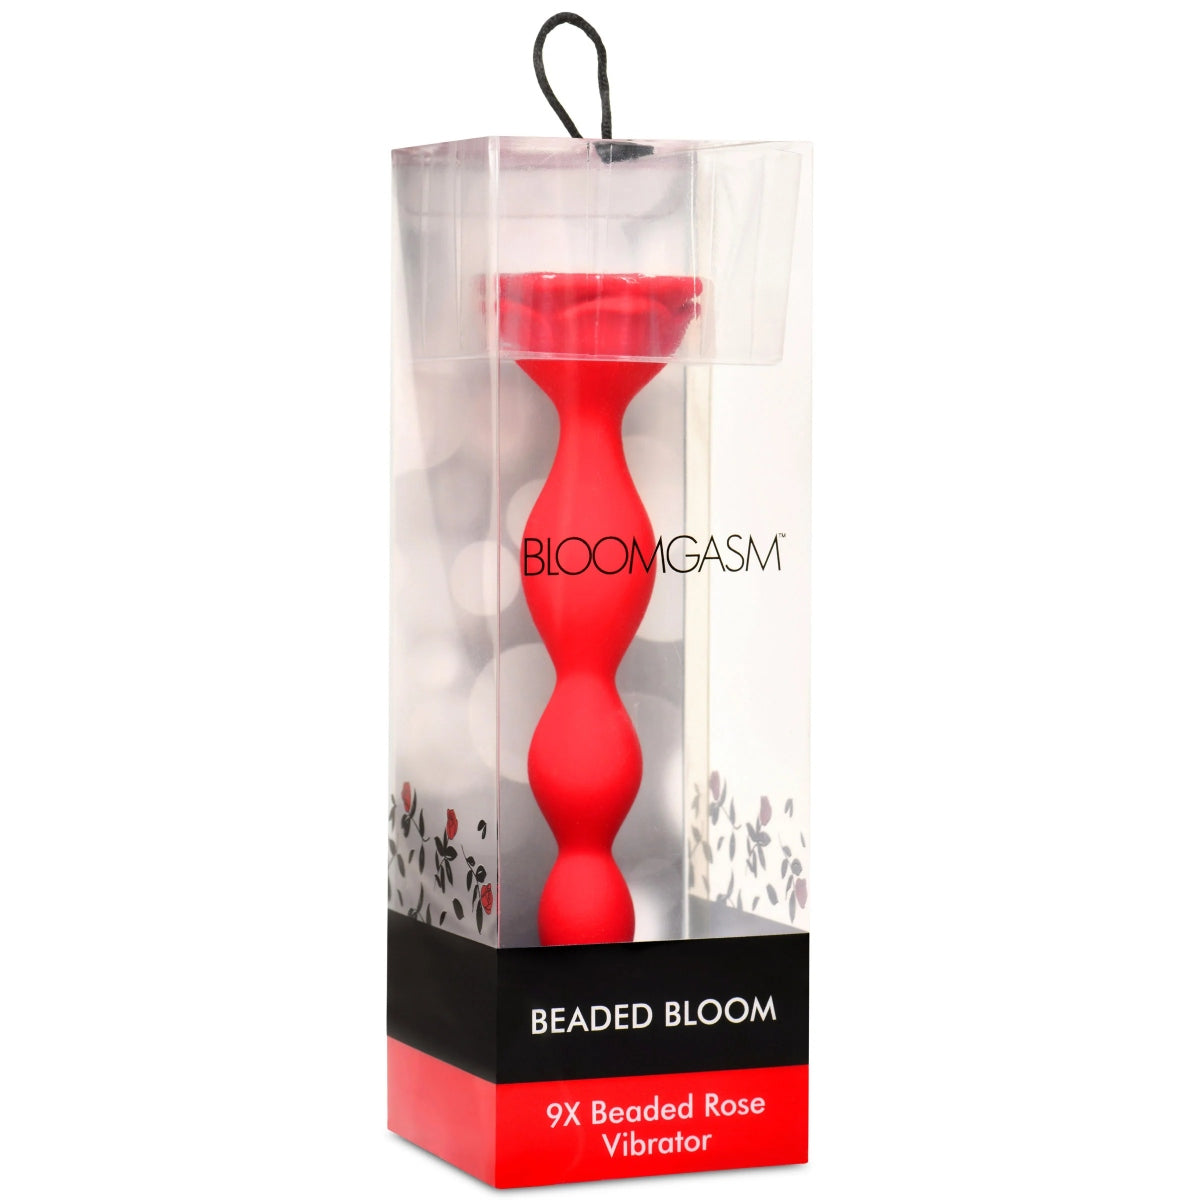 Bloomgasm | Beaded Bloom 9X Beaded Rose Vibrator - Red